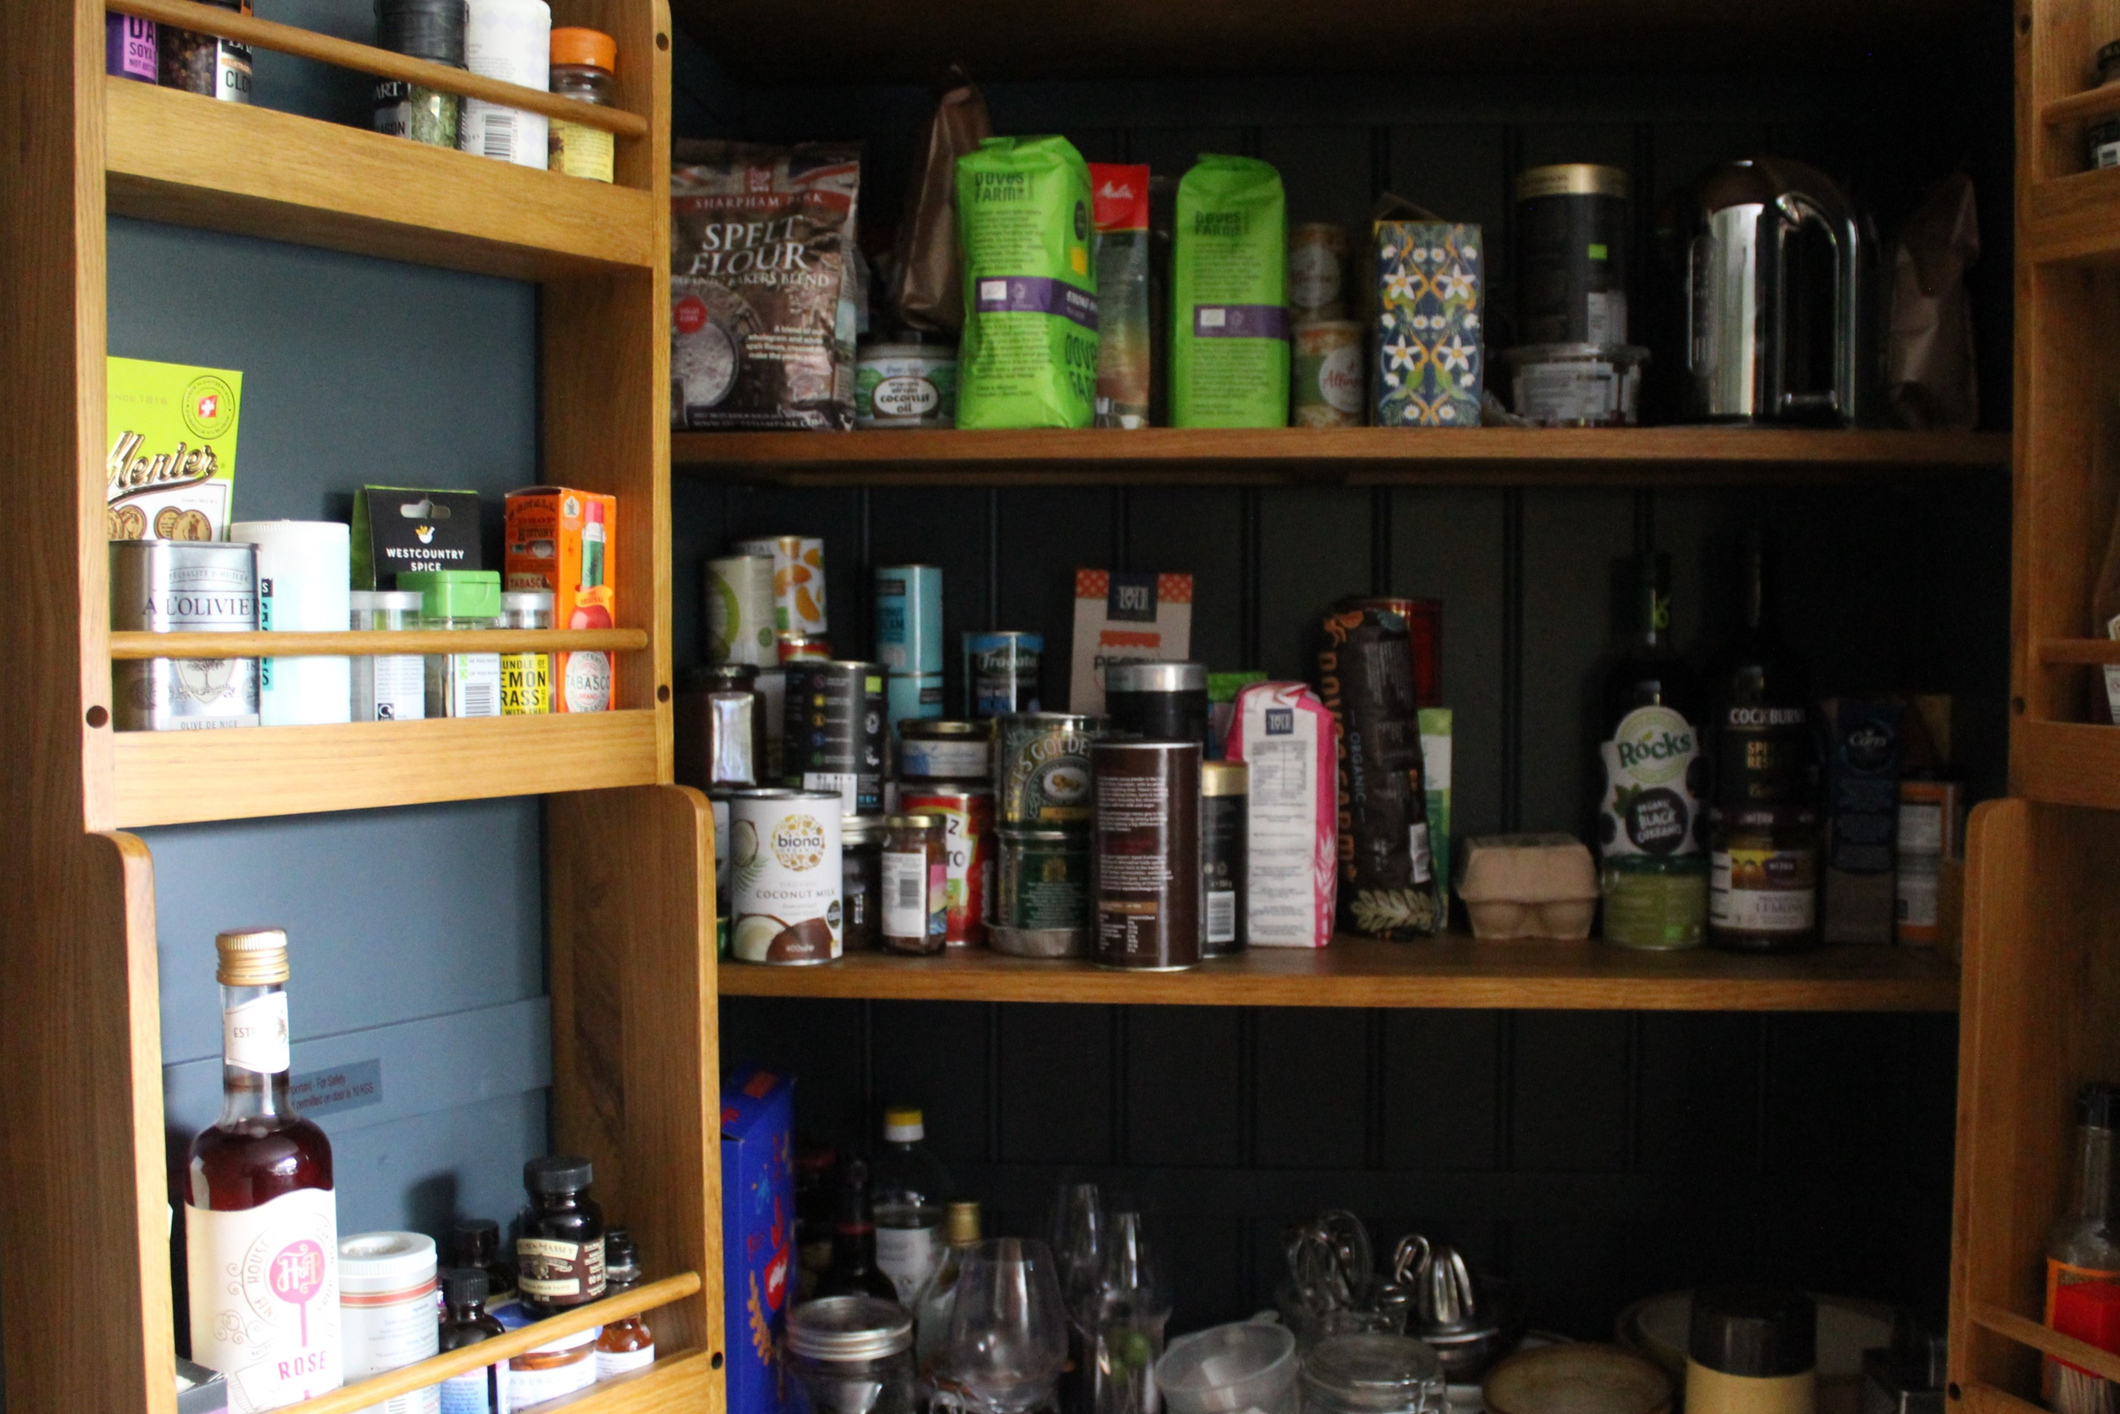 How to Organize Pantry Items: 9 Tips for Effective Kitchen